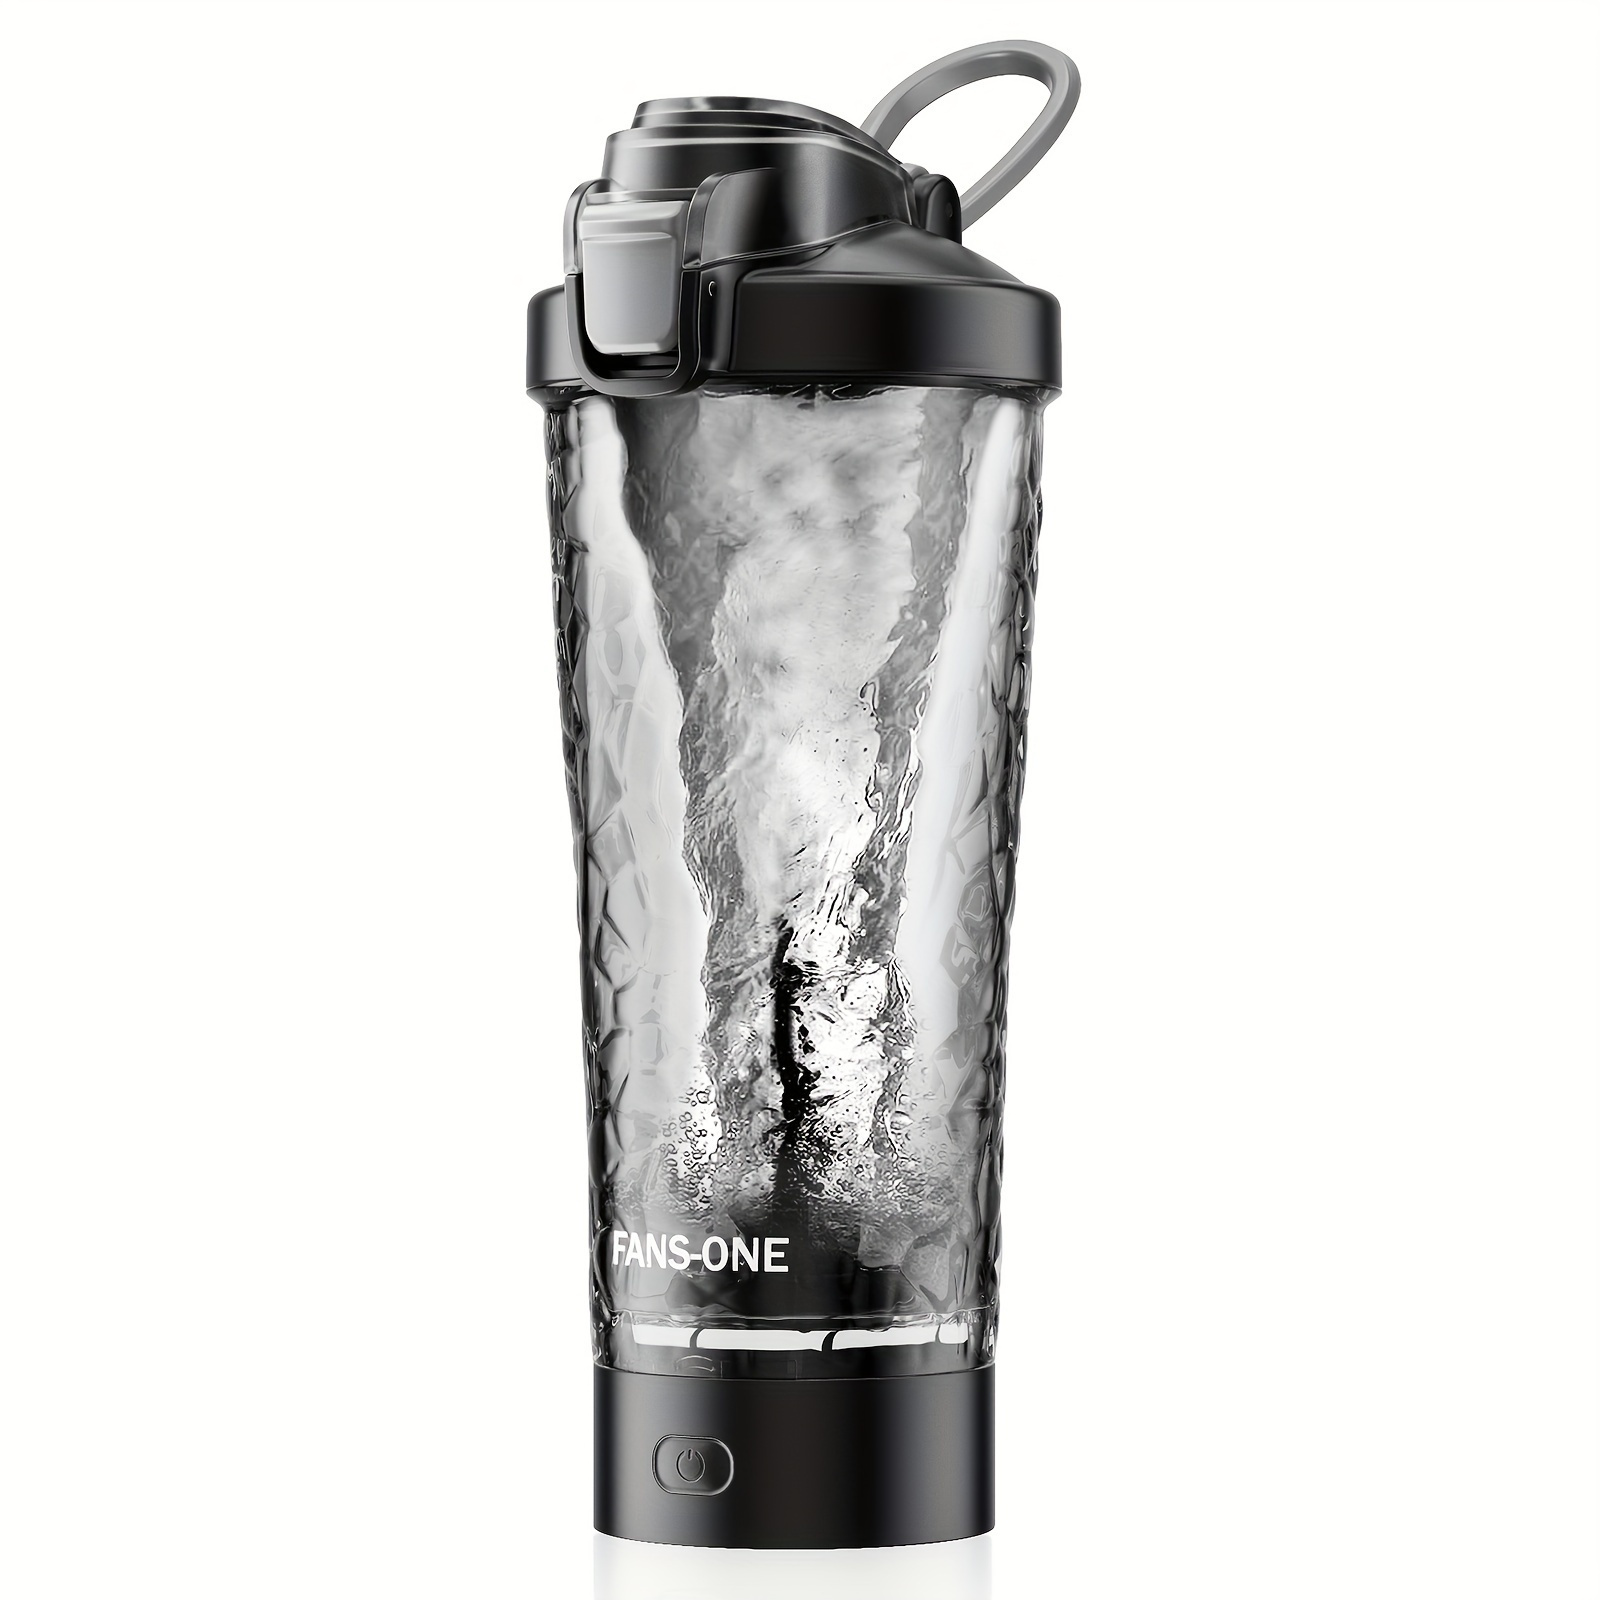 Portable Stainless Steel Protein Shaker Bottle 700ml for Gym/Camping,Silver